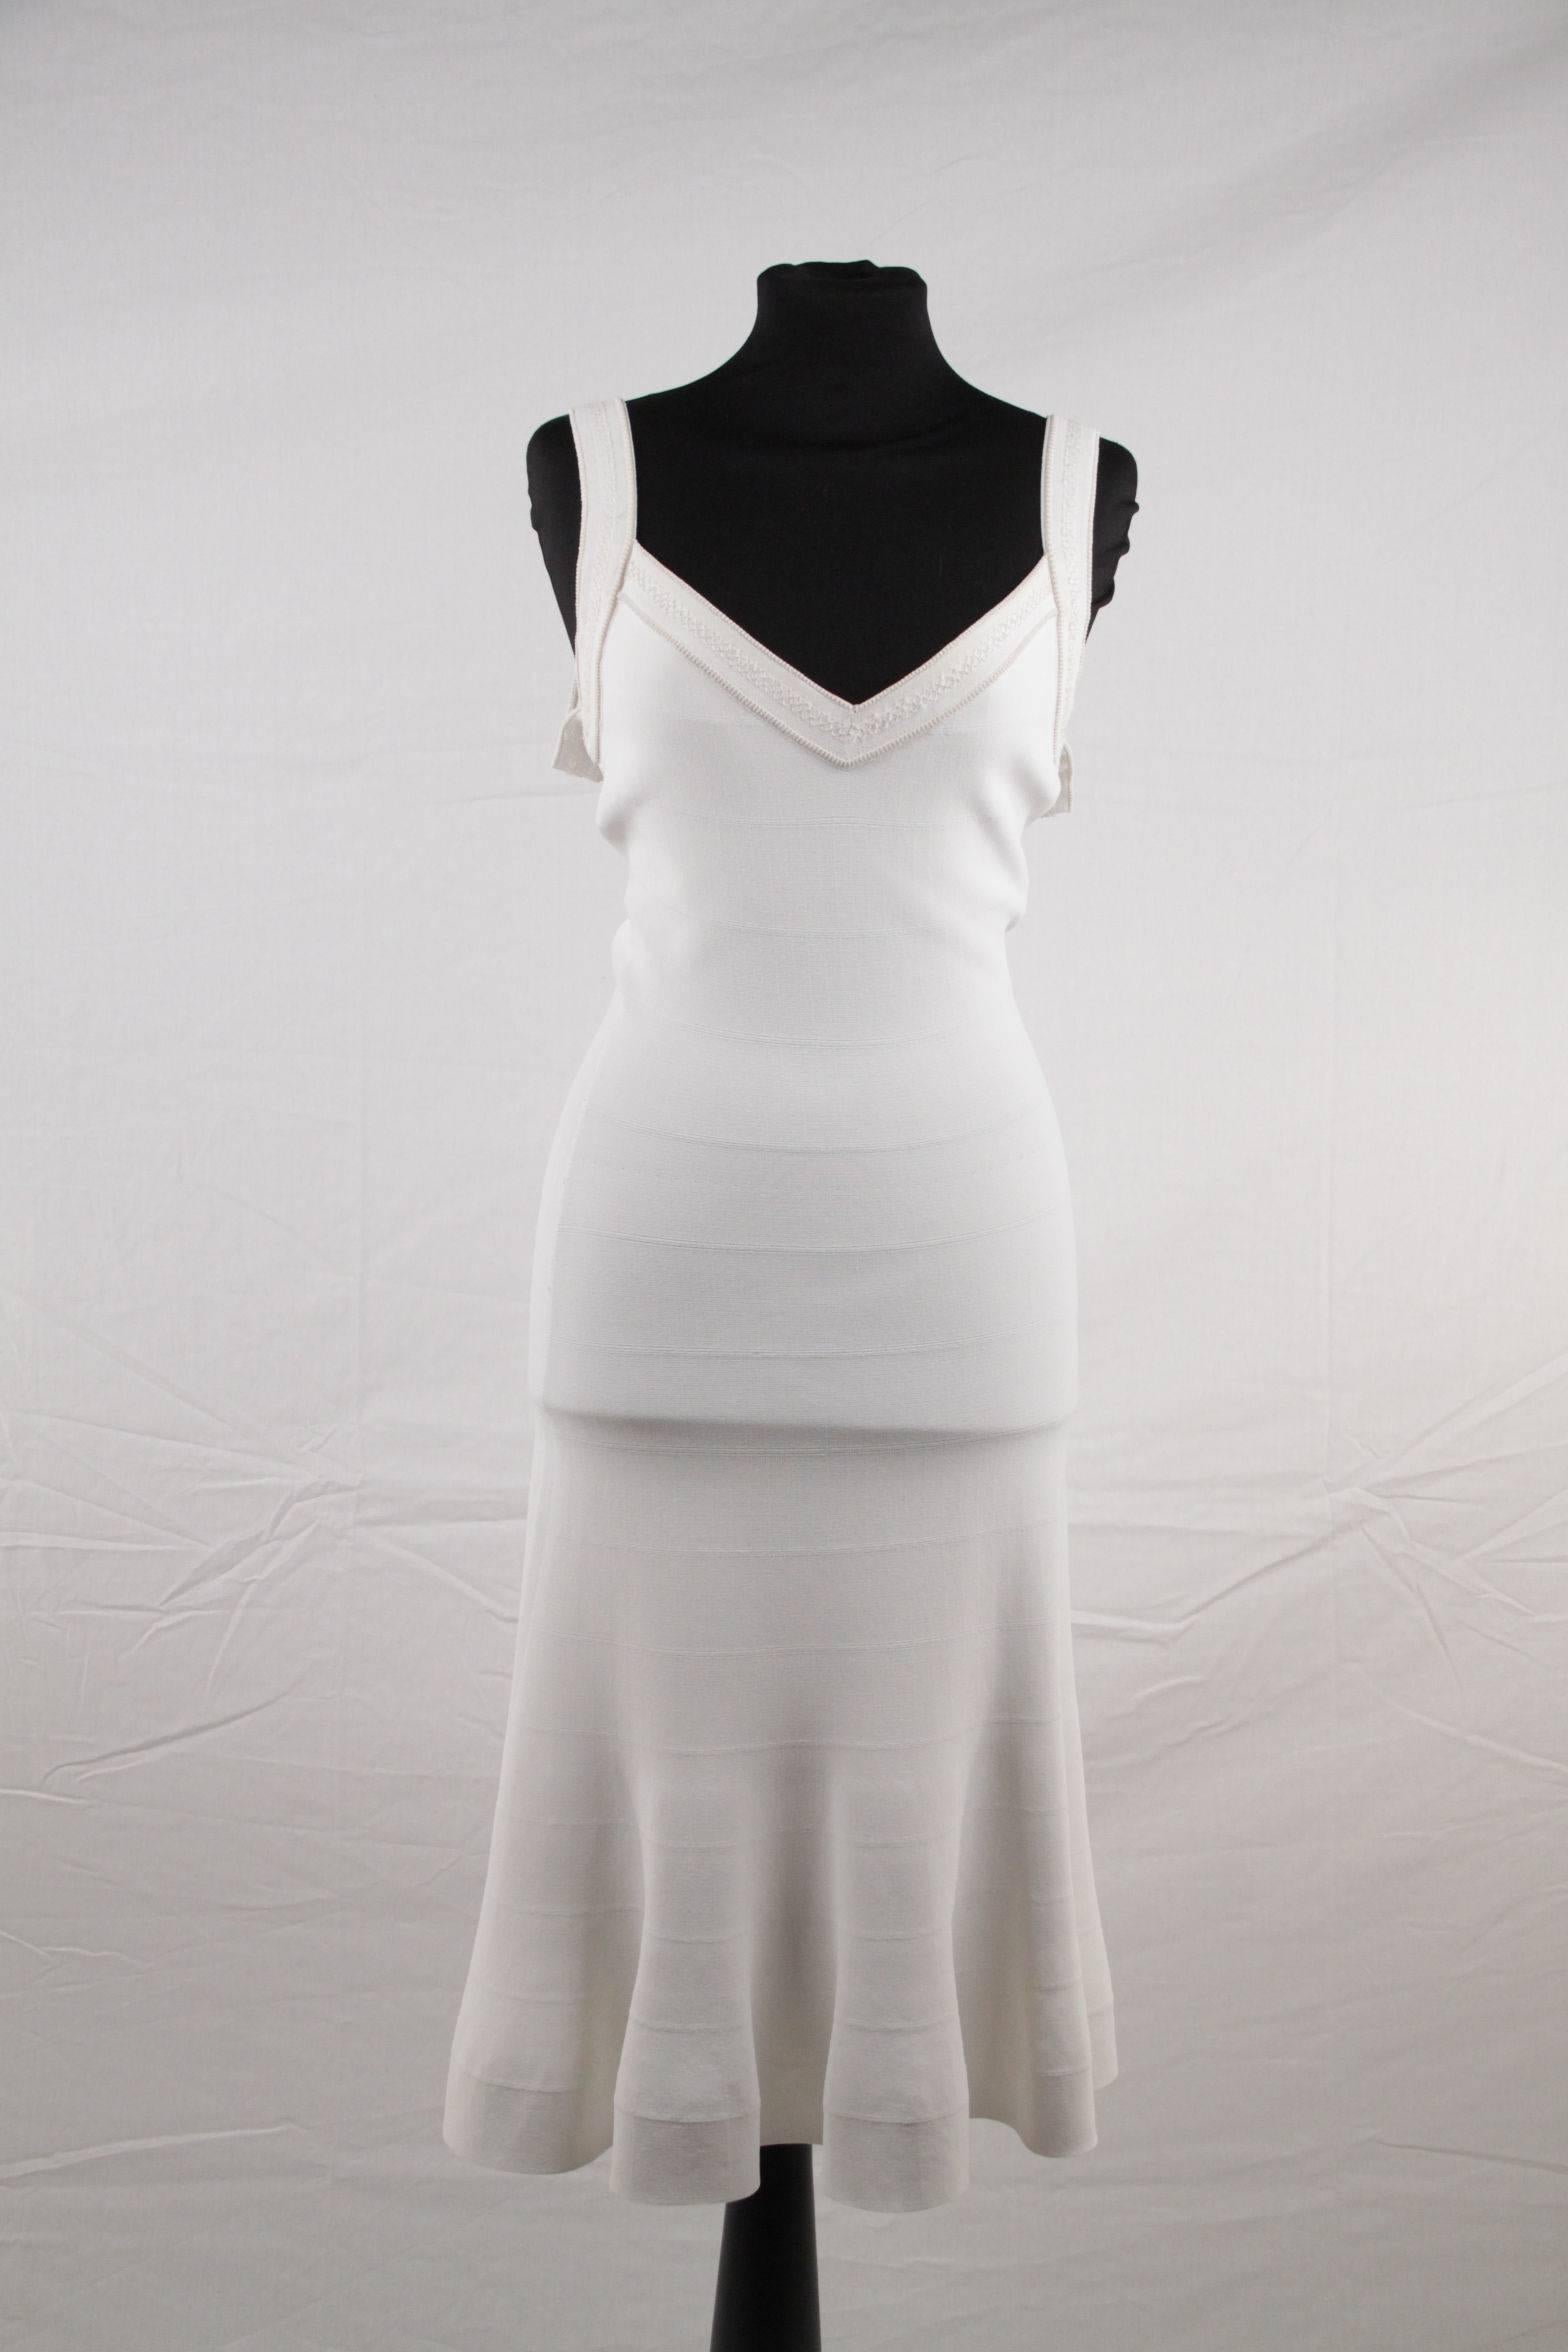  - Composition: 87% Viscose, 8% Nylon, 5% Polyester
- White color
- A line dress with full skirt, easy yet chic!
- V-neckline
- Seam detail throughout
- Sleeveless design
- Unilned
- Made in Italy
- Size is not indicated. Estimated size is a